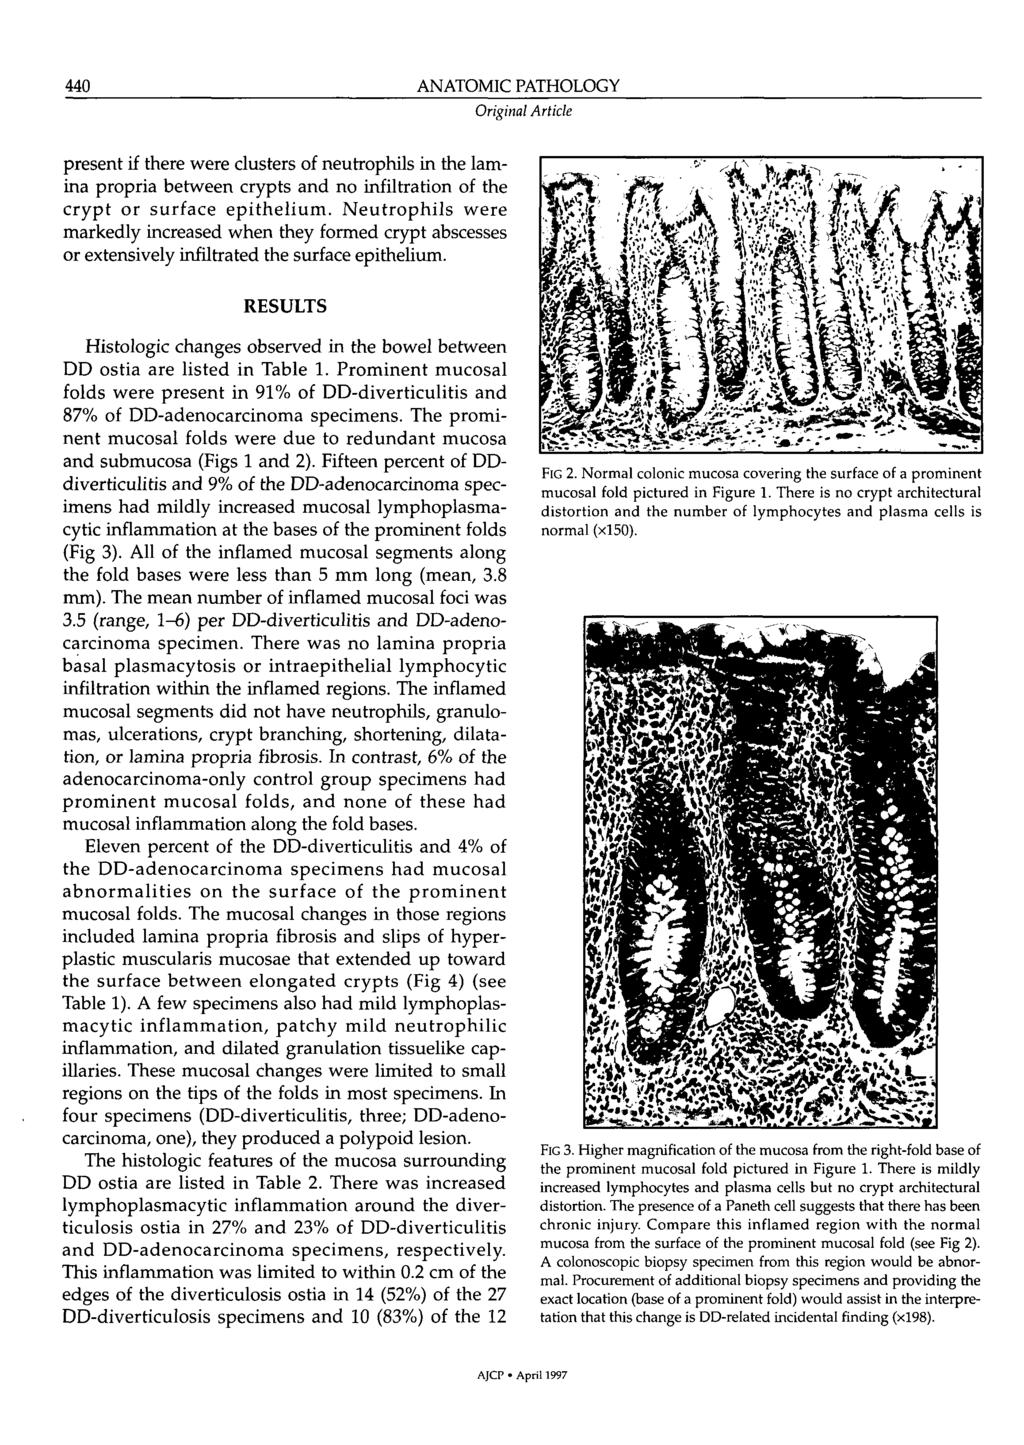 ANATOMIC PATHOLOGY 440 Original Article present if there were clusters of neutrophils in the lamina propria between crypts and no infiltration of the c r y p t or surface e p i t h e l i u m.